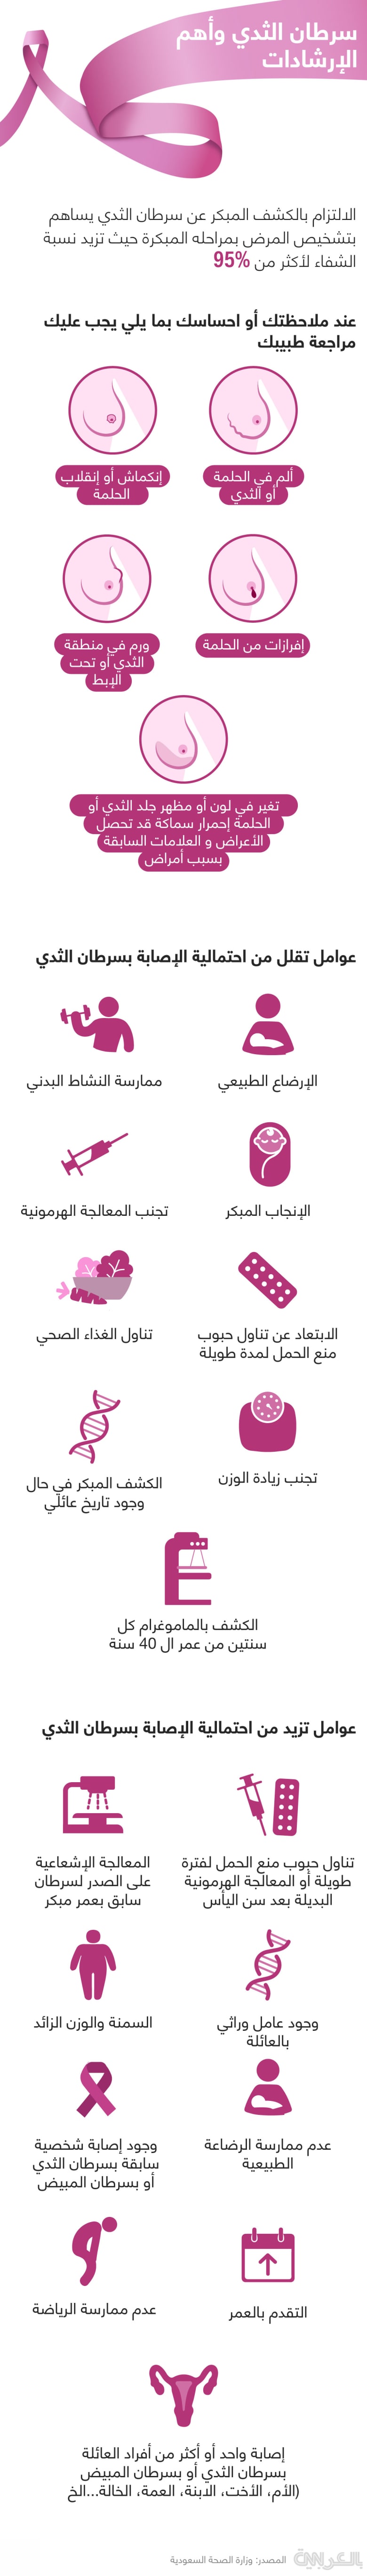 Breast-Cancer-guideline